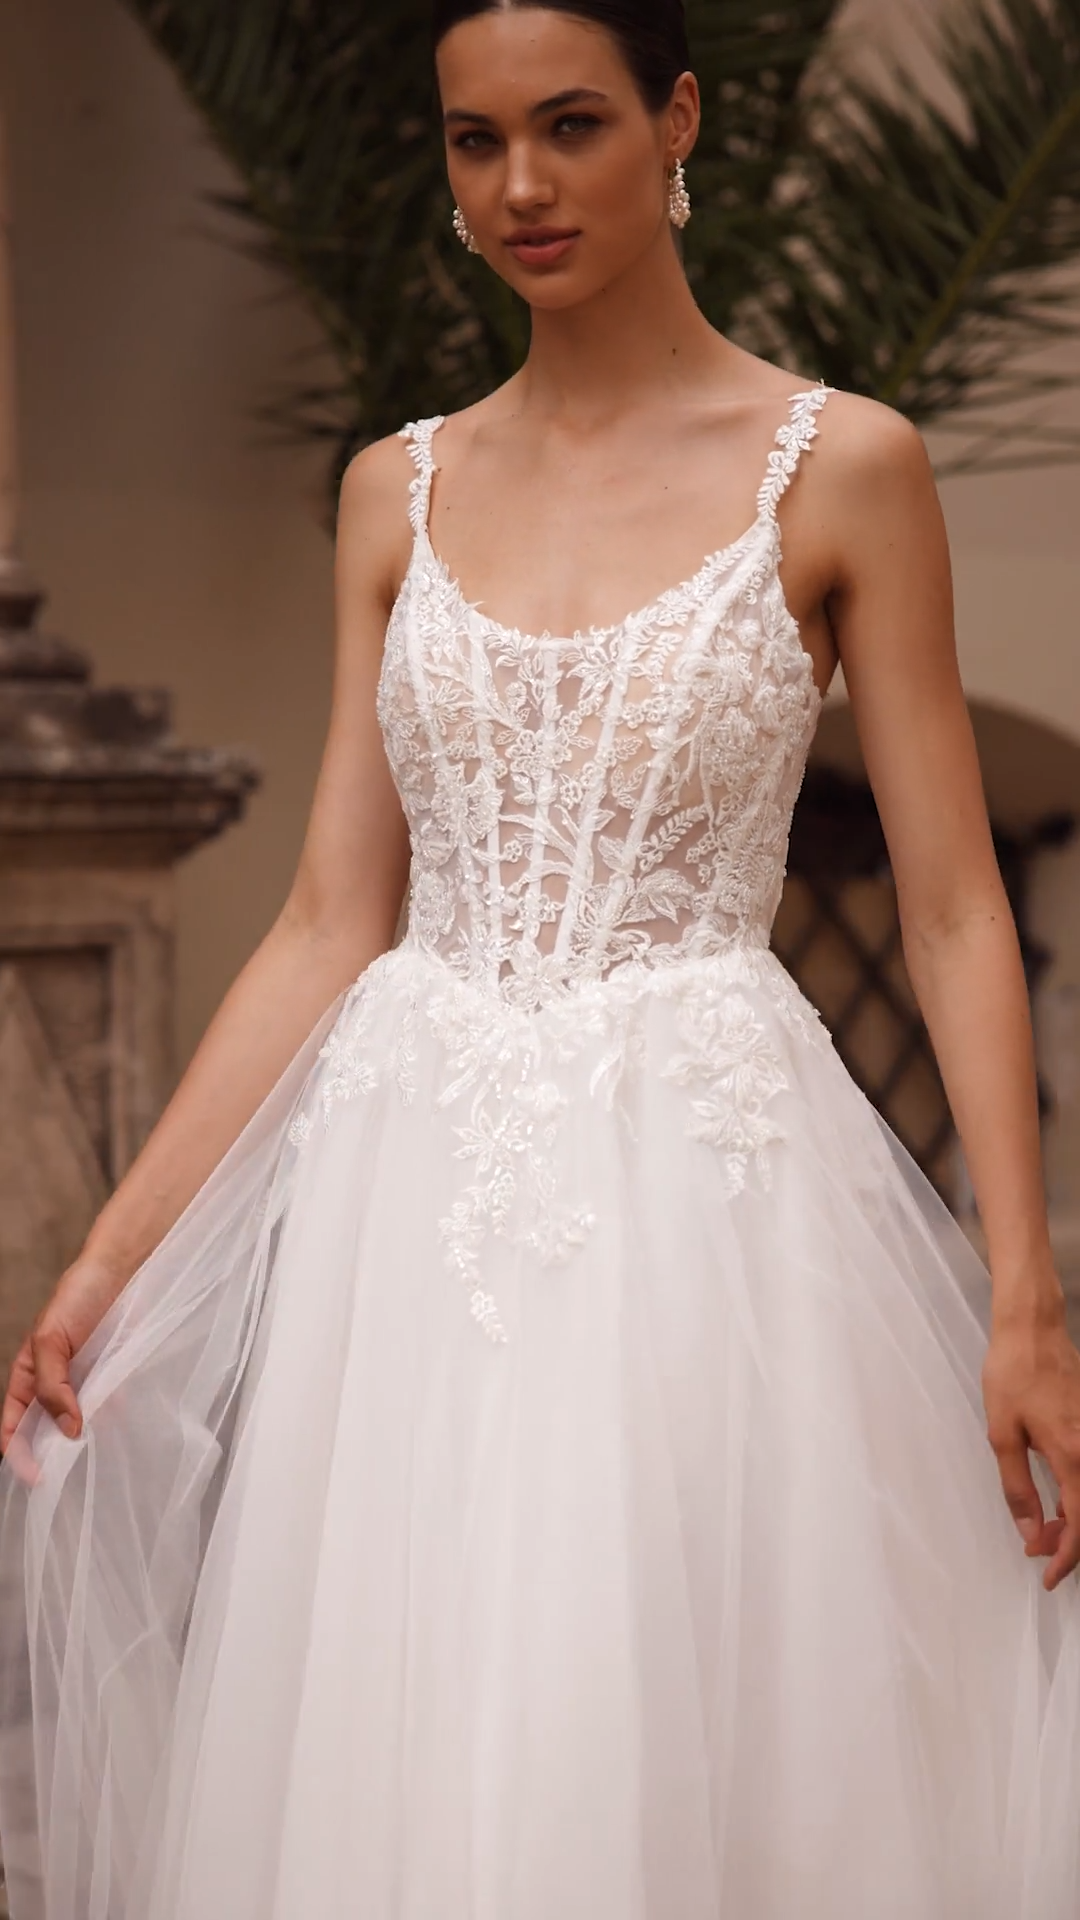 Bride in a tulle wedding dress with vine lace illusion bodice and Basque waistline